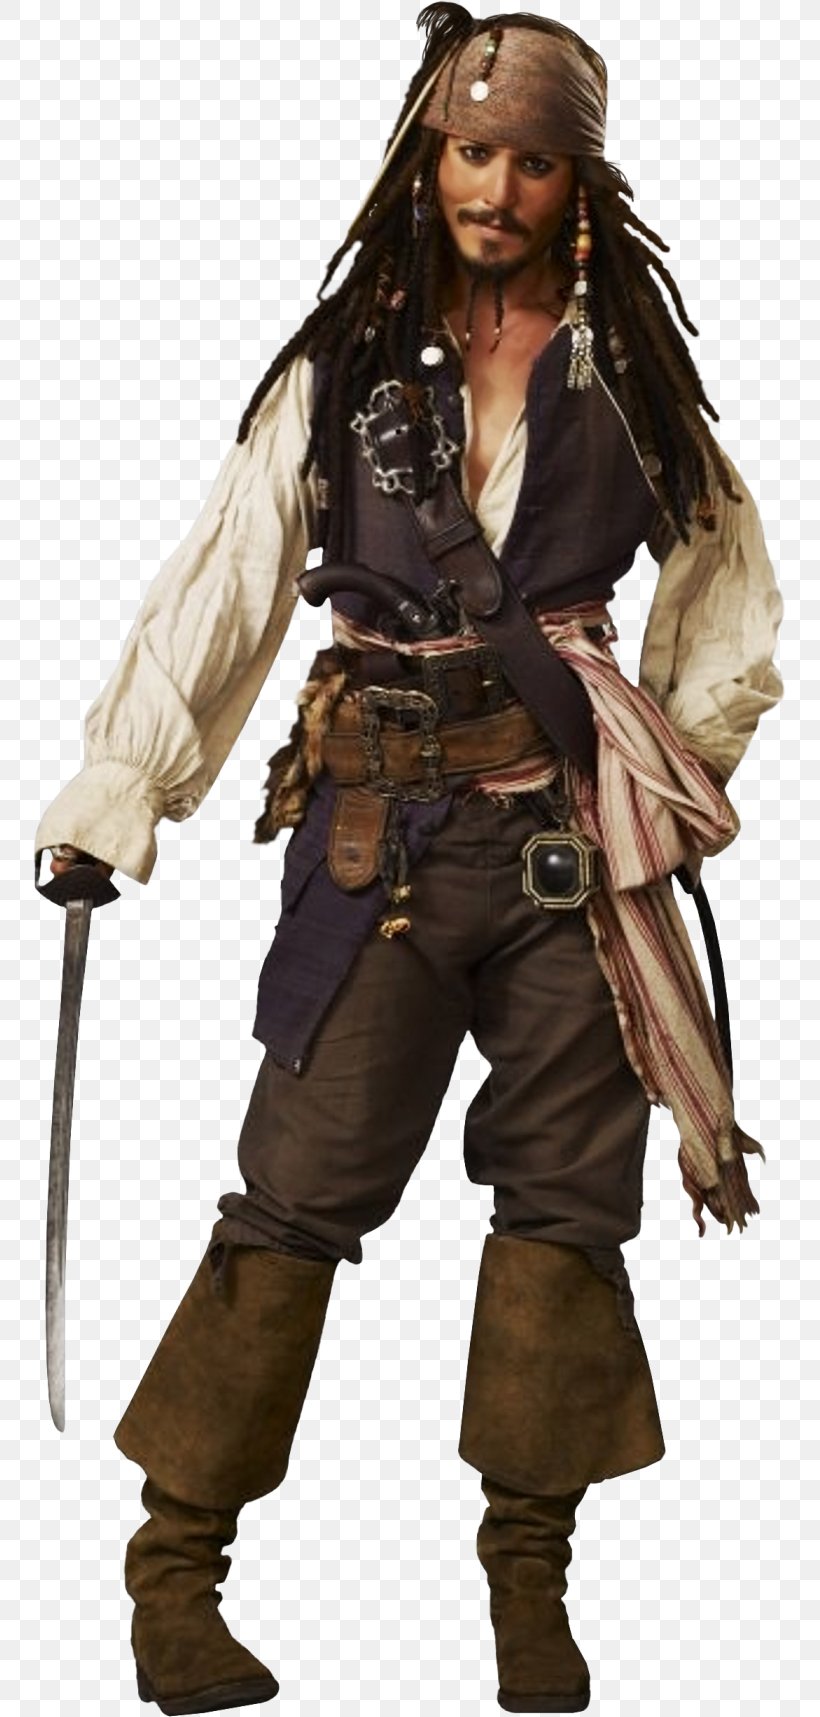 Jack Sparrow Pirates Of The Caribbean: The Curse Of The Black Pearl Piracy Film, PNG, 753x1717px, Jack Sparrow, Actor, Costume, Costume Design, Edward Scissorhands Download Free